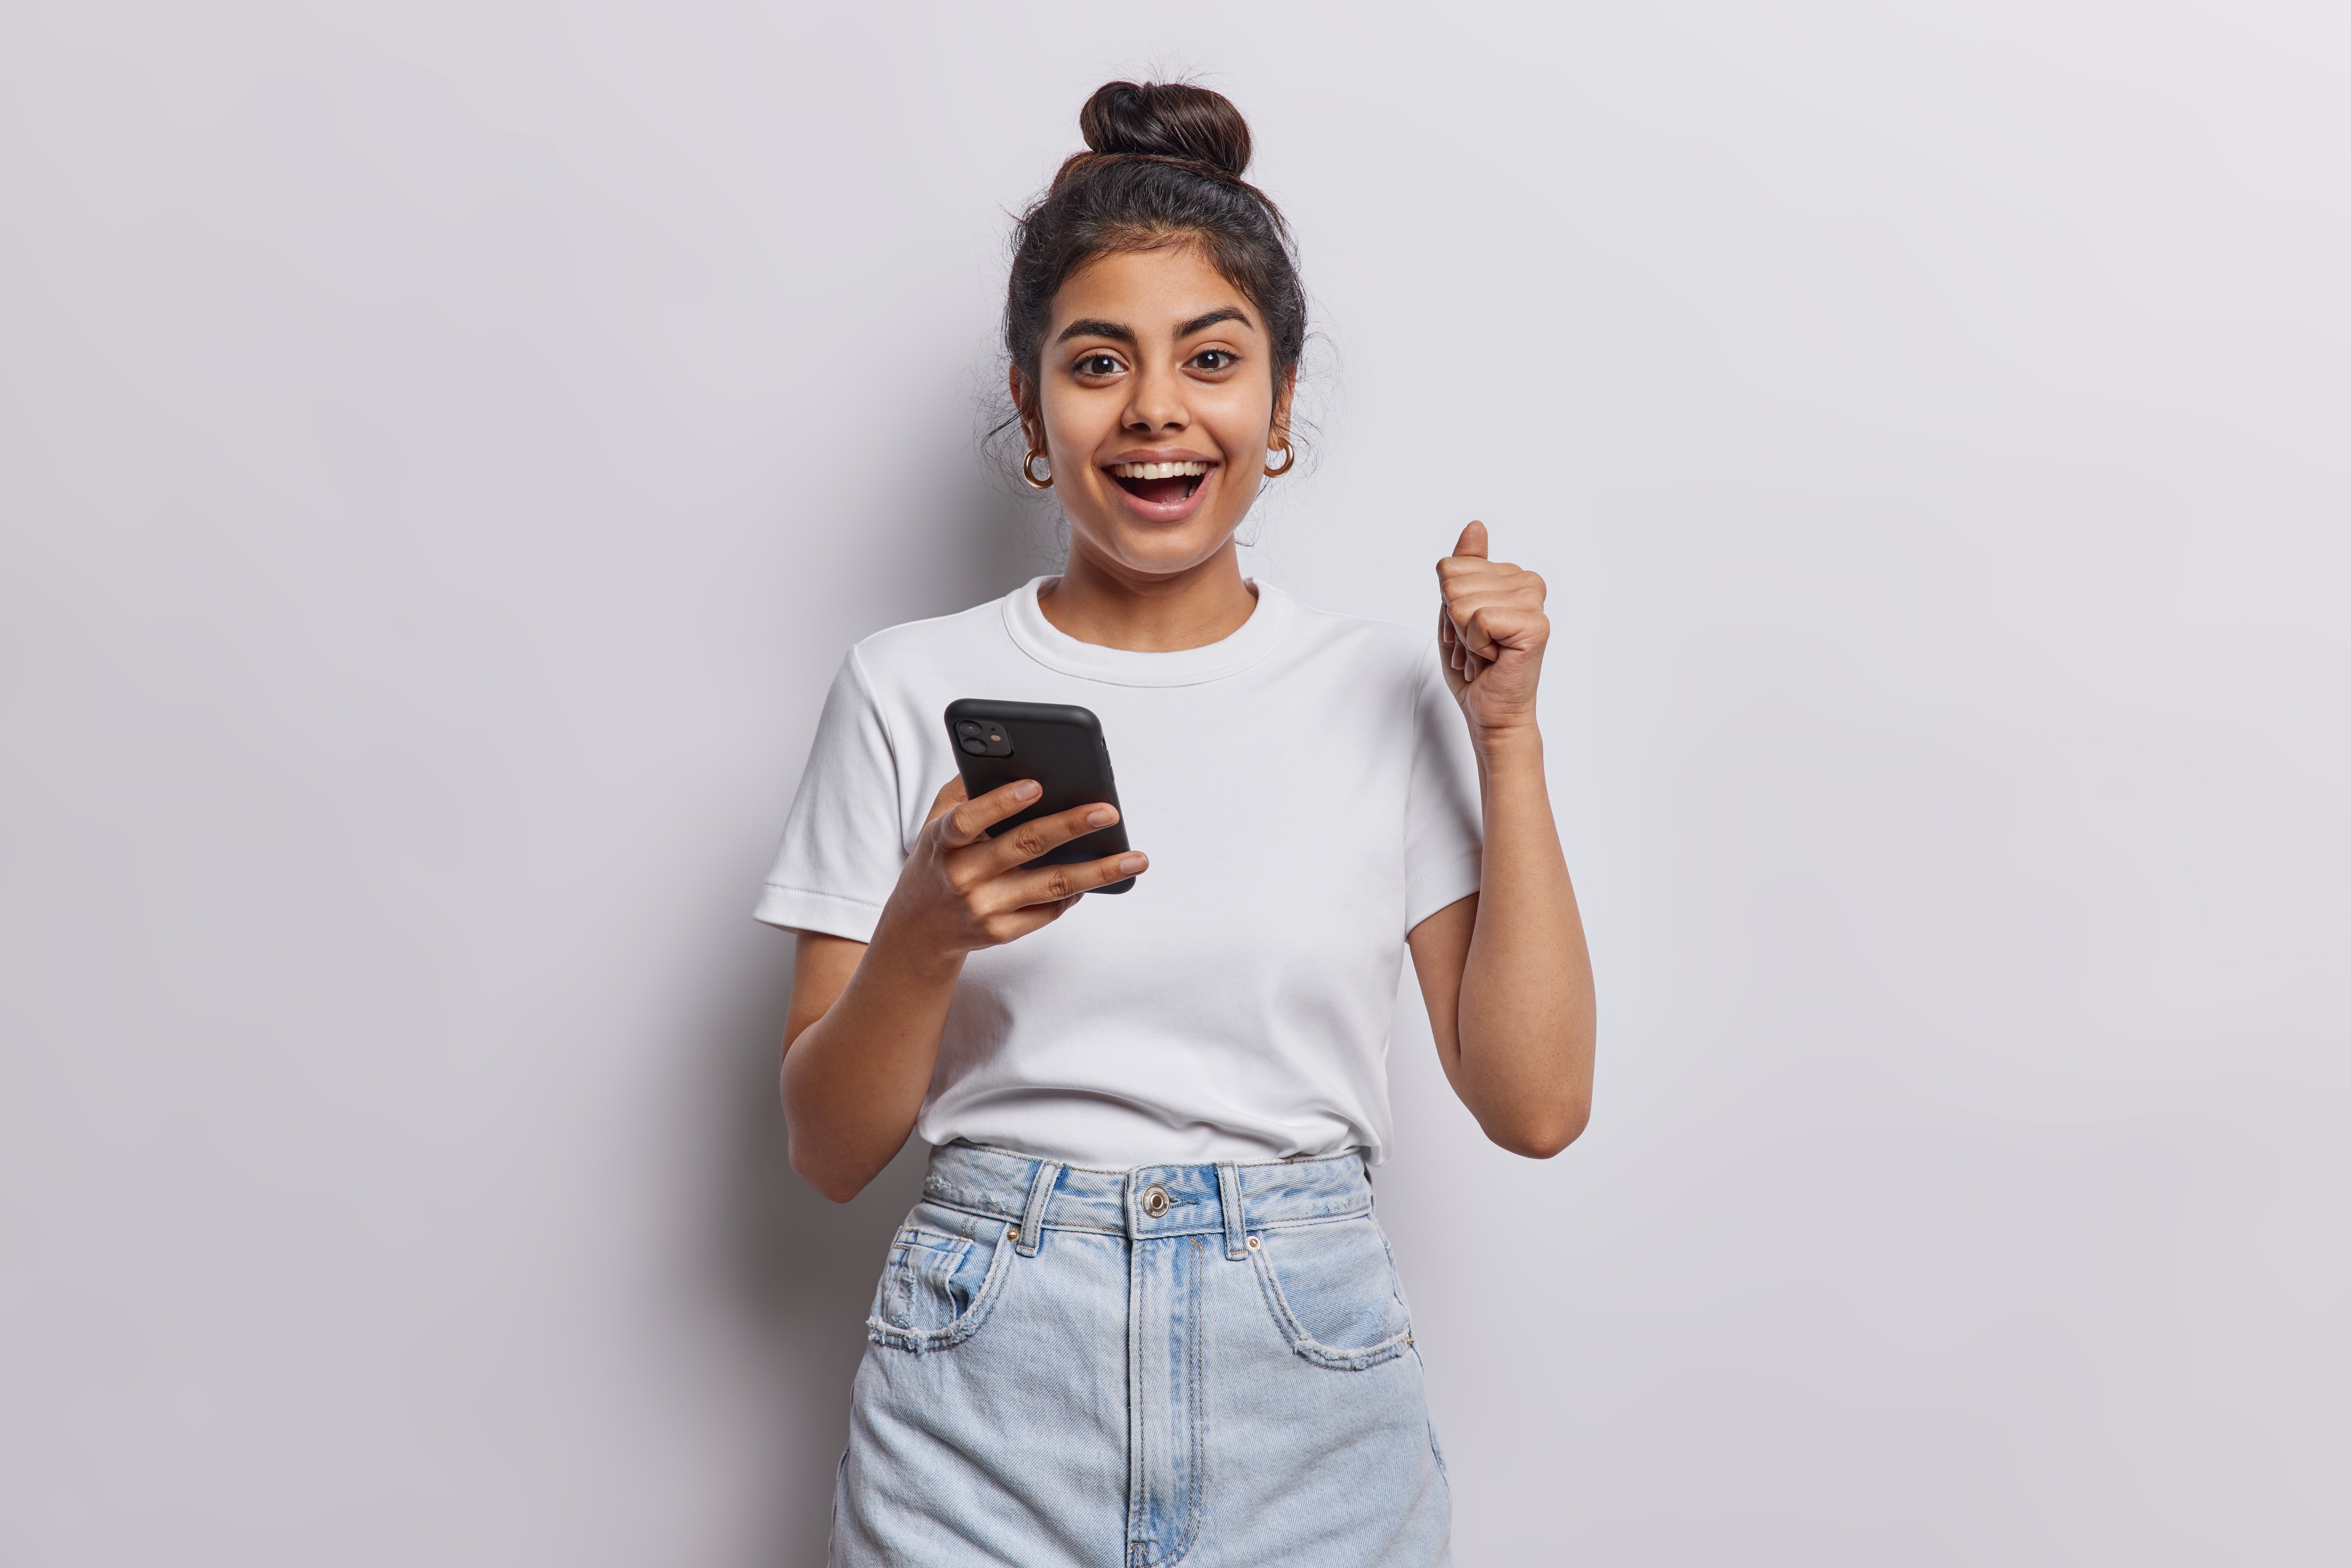 Cheerful young woman showing a thumbs up while on her phone | Source: Shutterstock